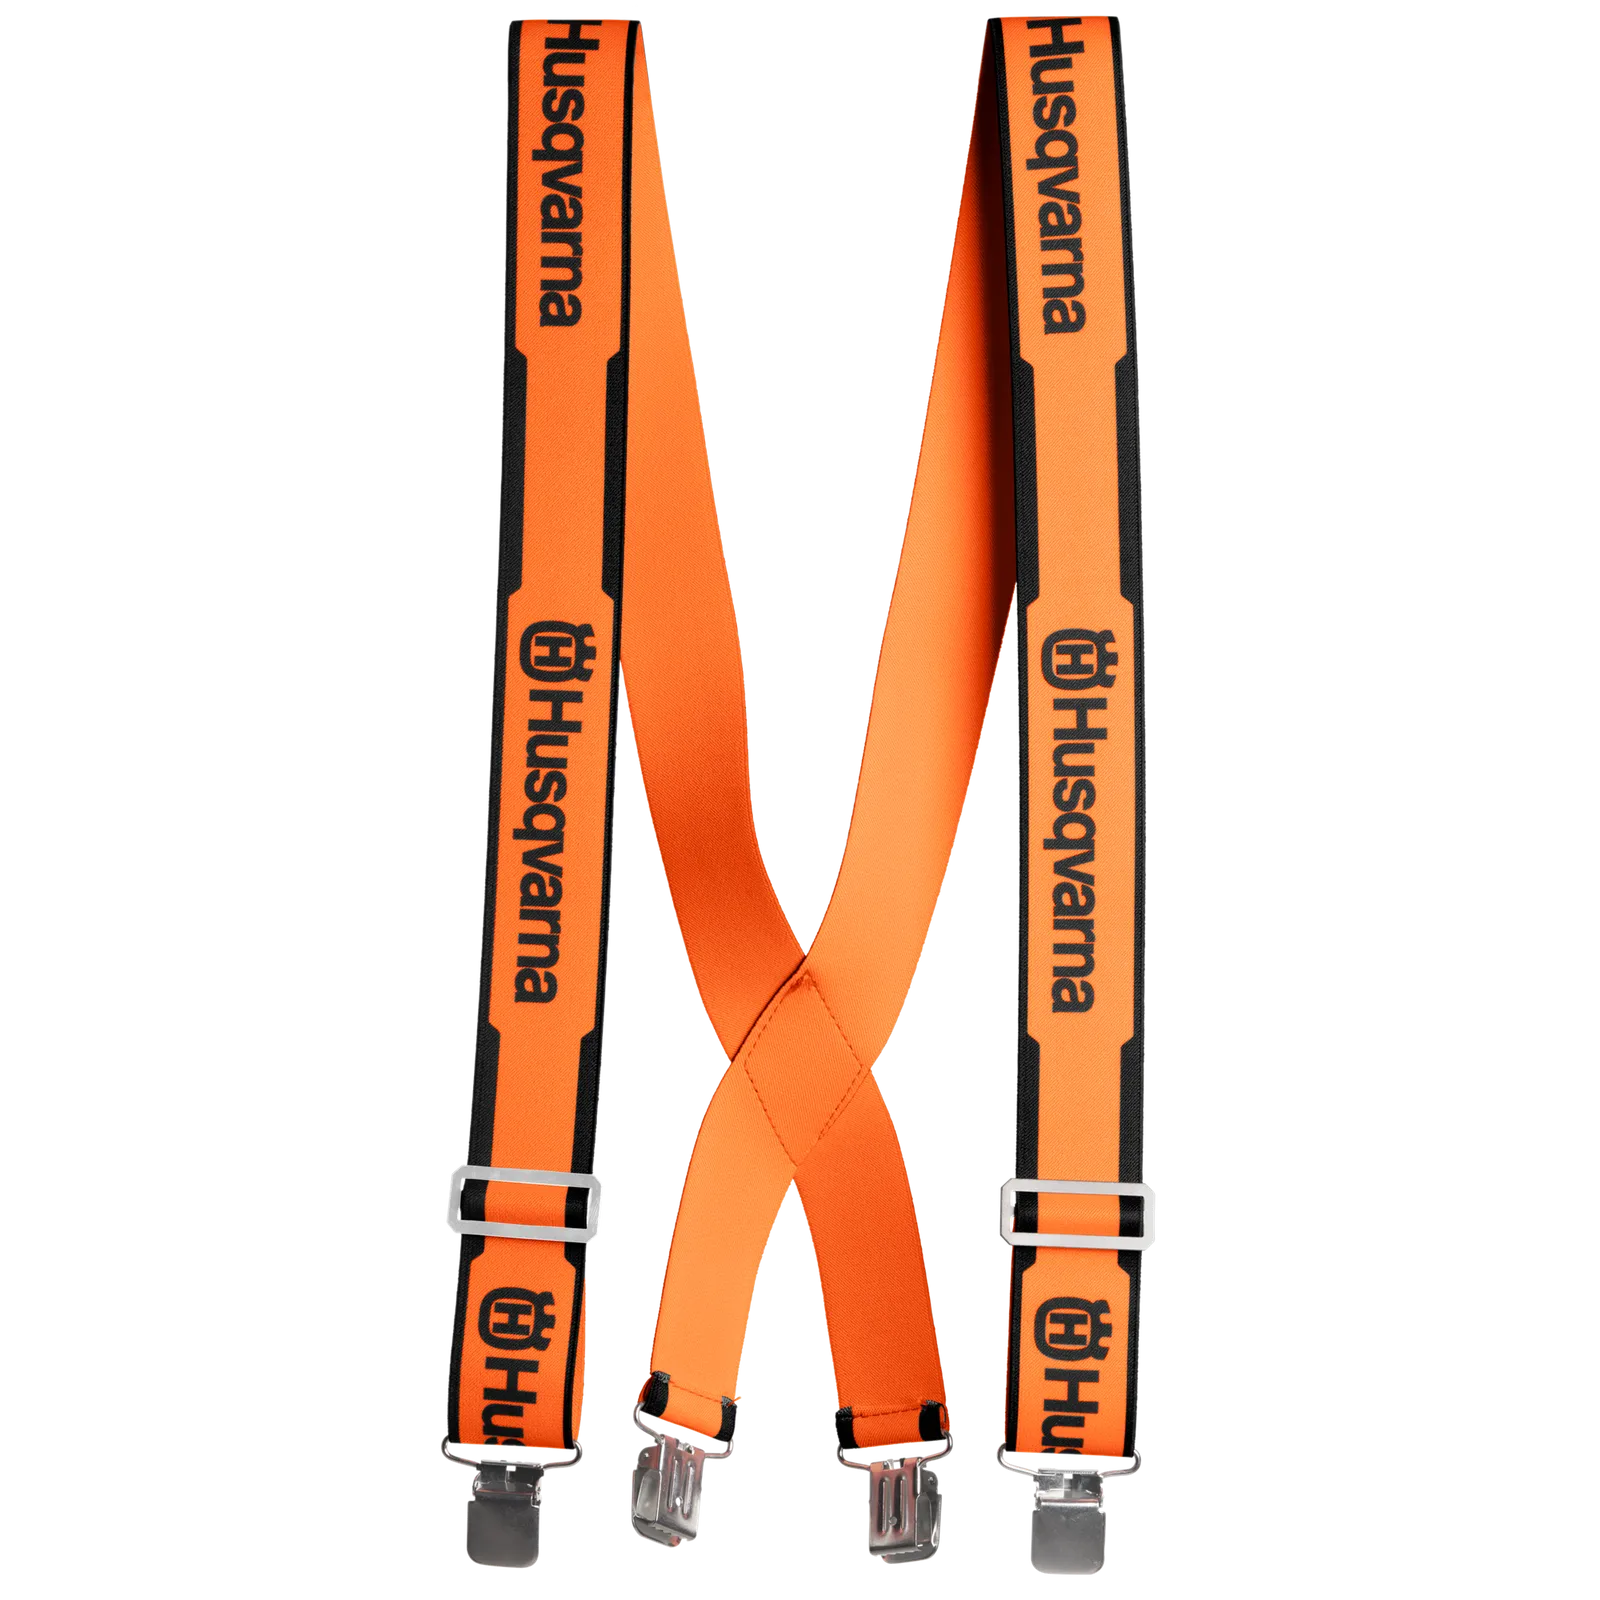 Husqvarna Suspenders (clips) for chainsaw pants